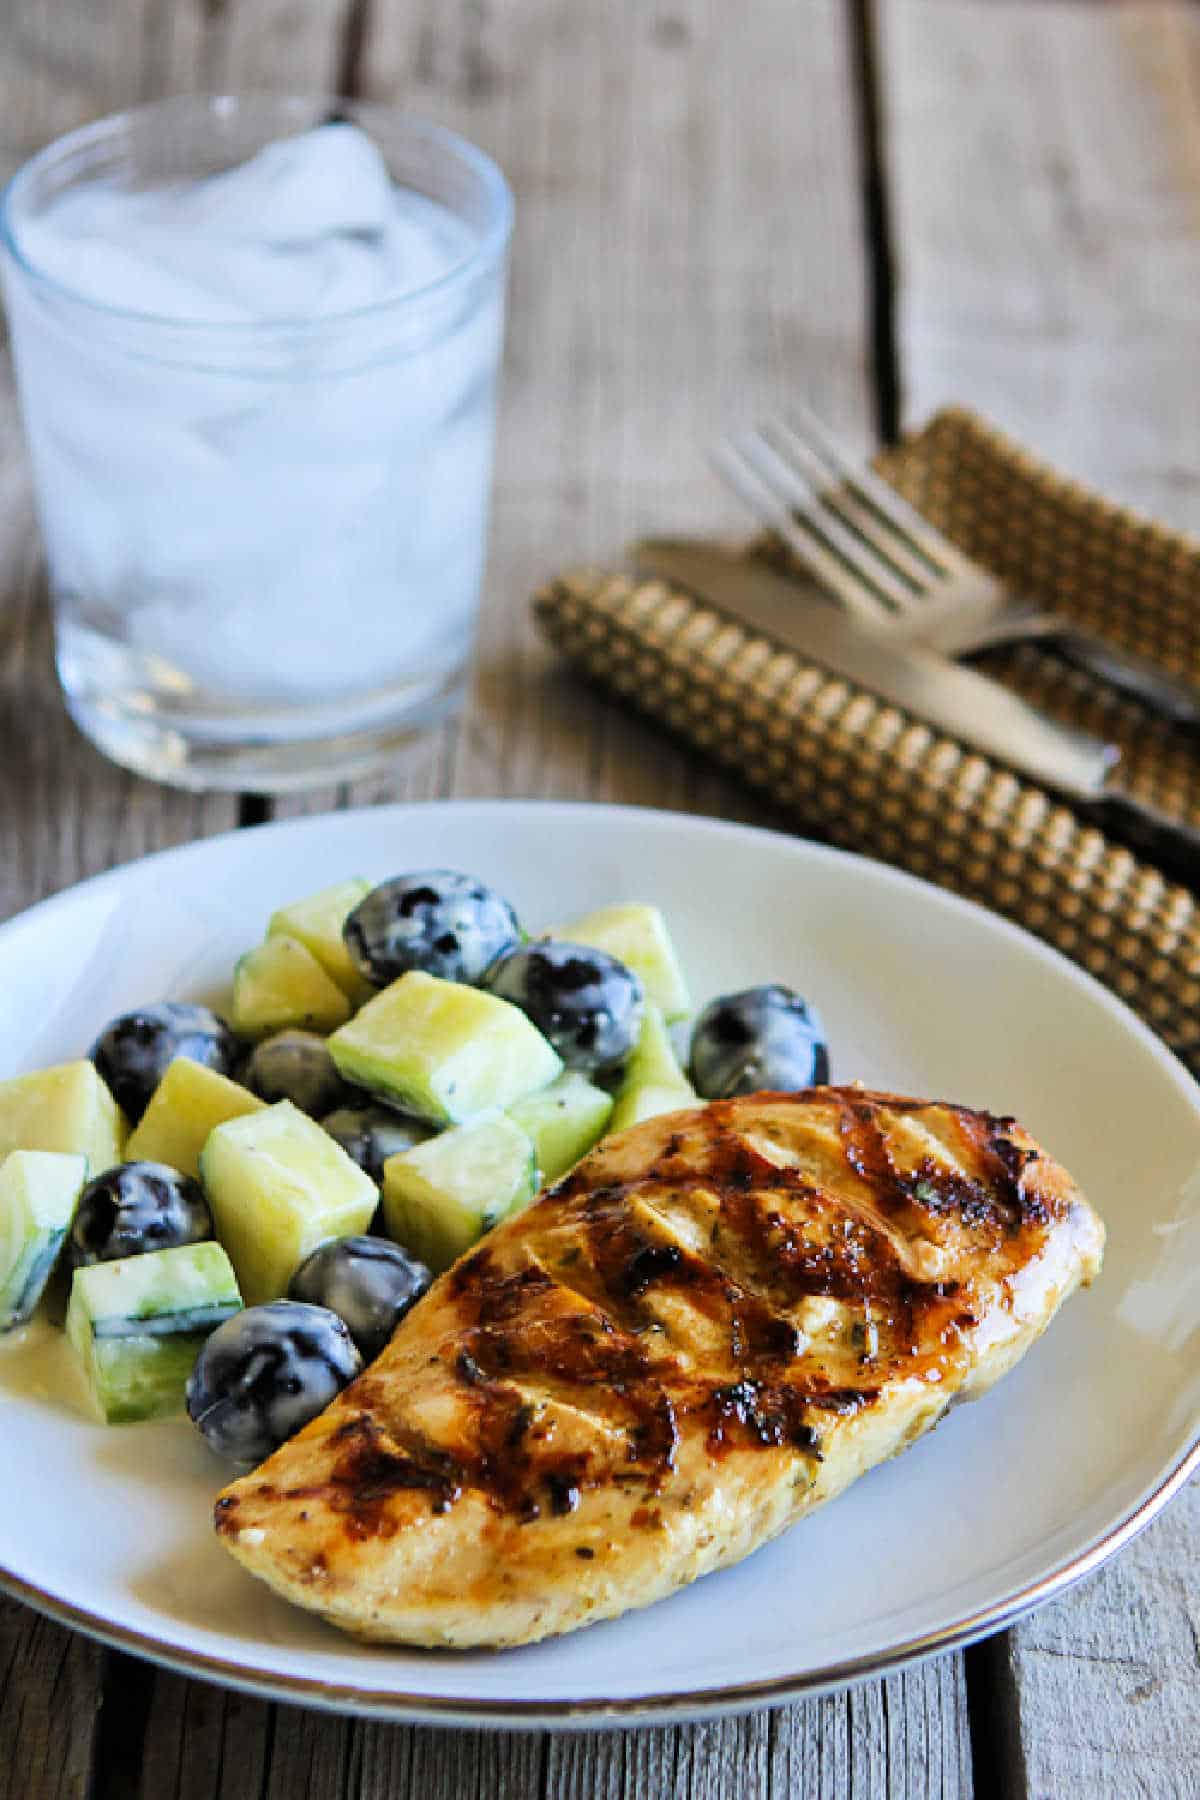 Grilled chicken with lemon and capers as shown in the serving dish with cucumber and olive salad